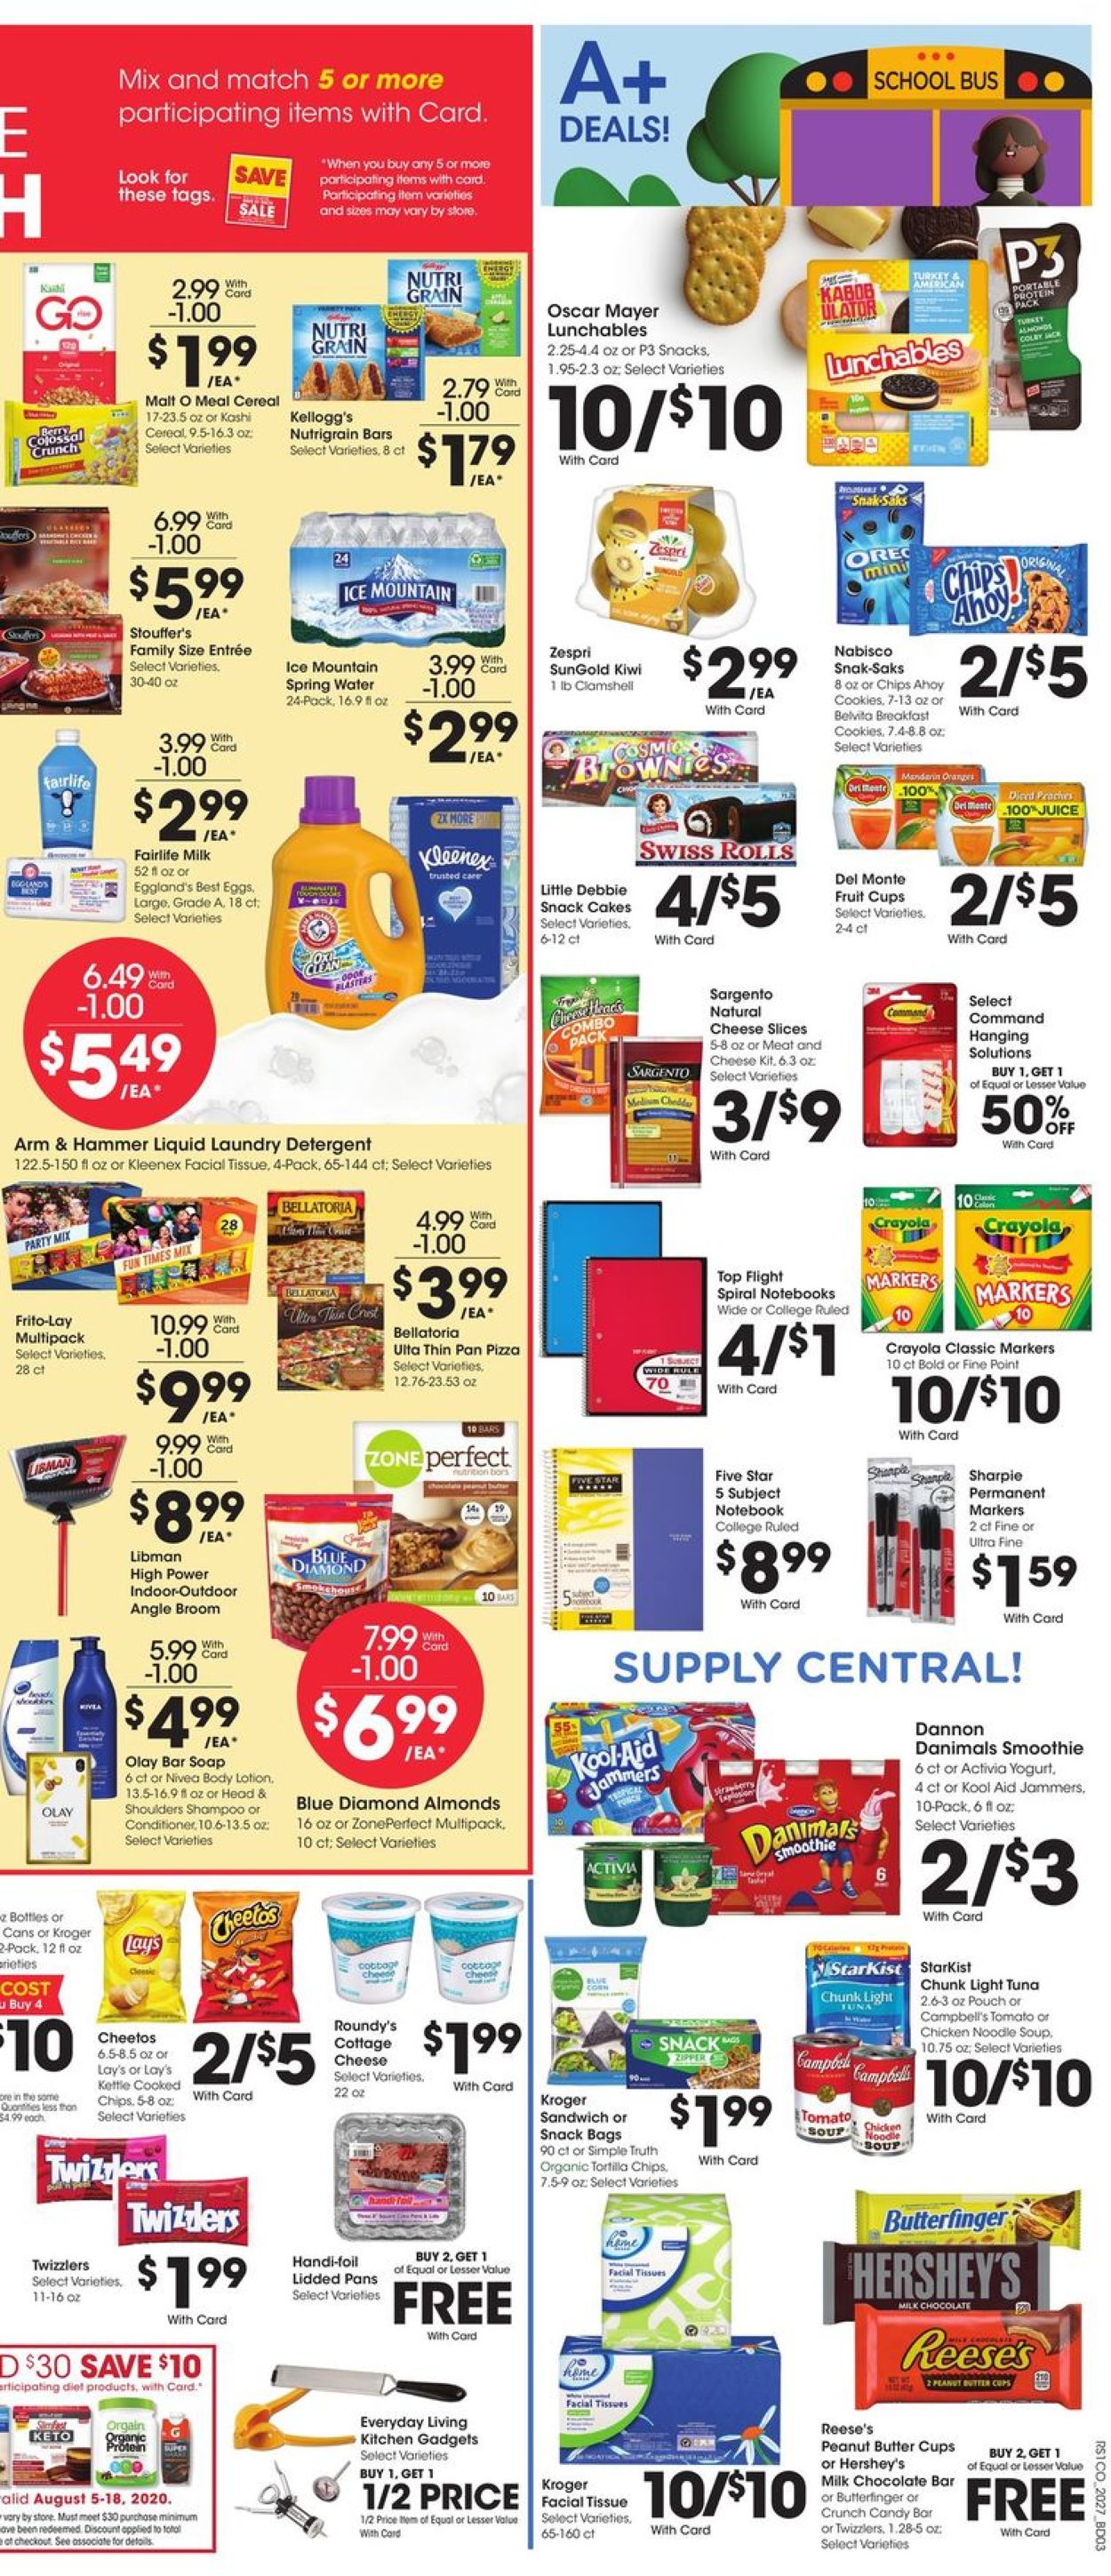 Metro Market Current weekly ad 08/05 - 08/11/2020 [5] - frequent-ads.com